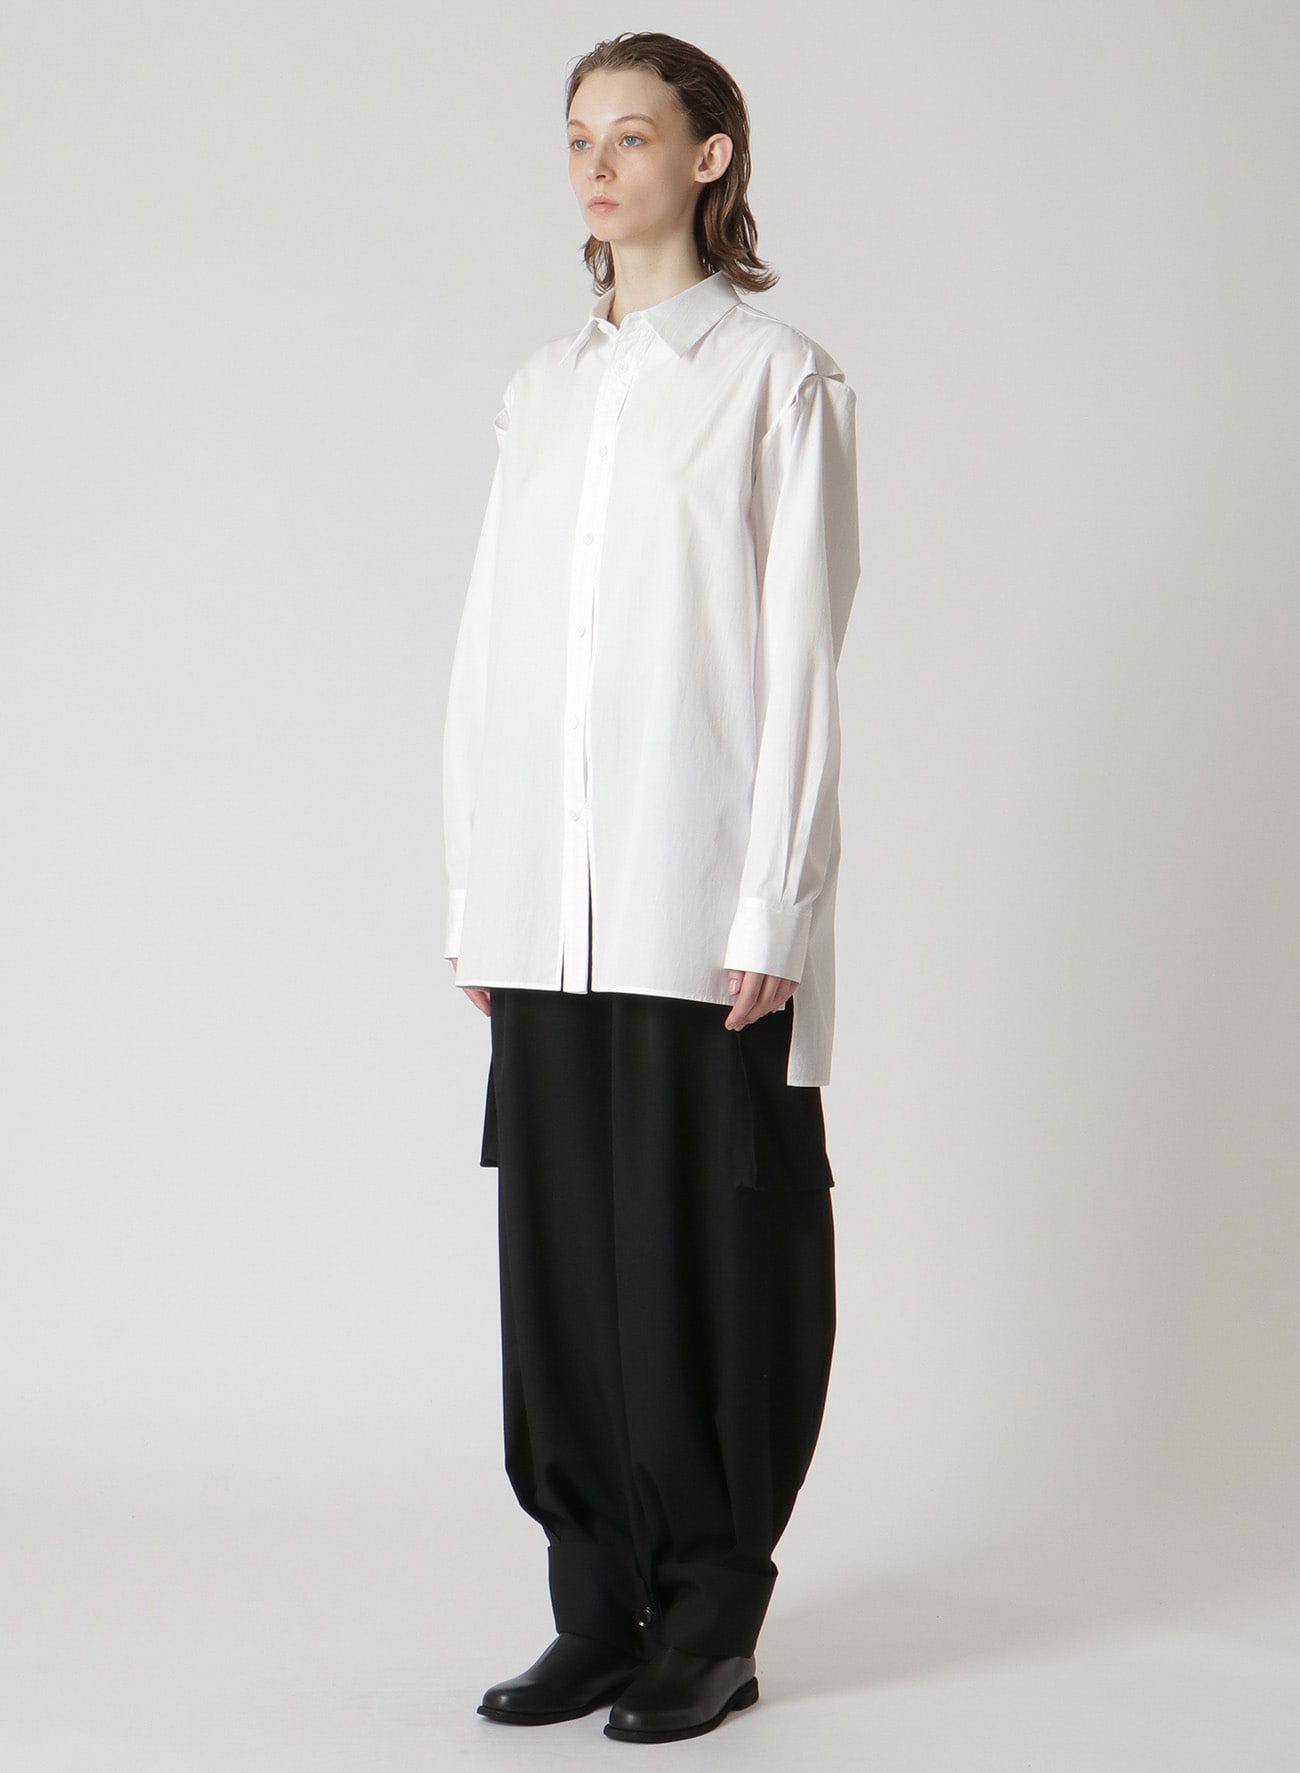 COTTON BROADCLOTH DECONSTRUCTED SLEEVE DETAIL SHIRT